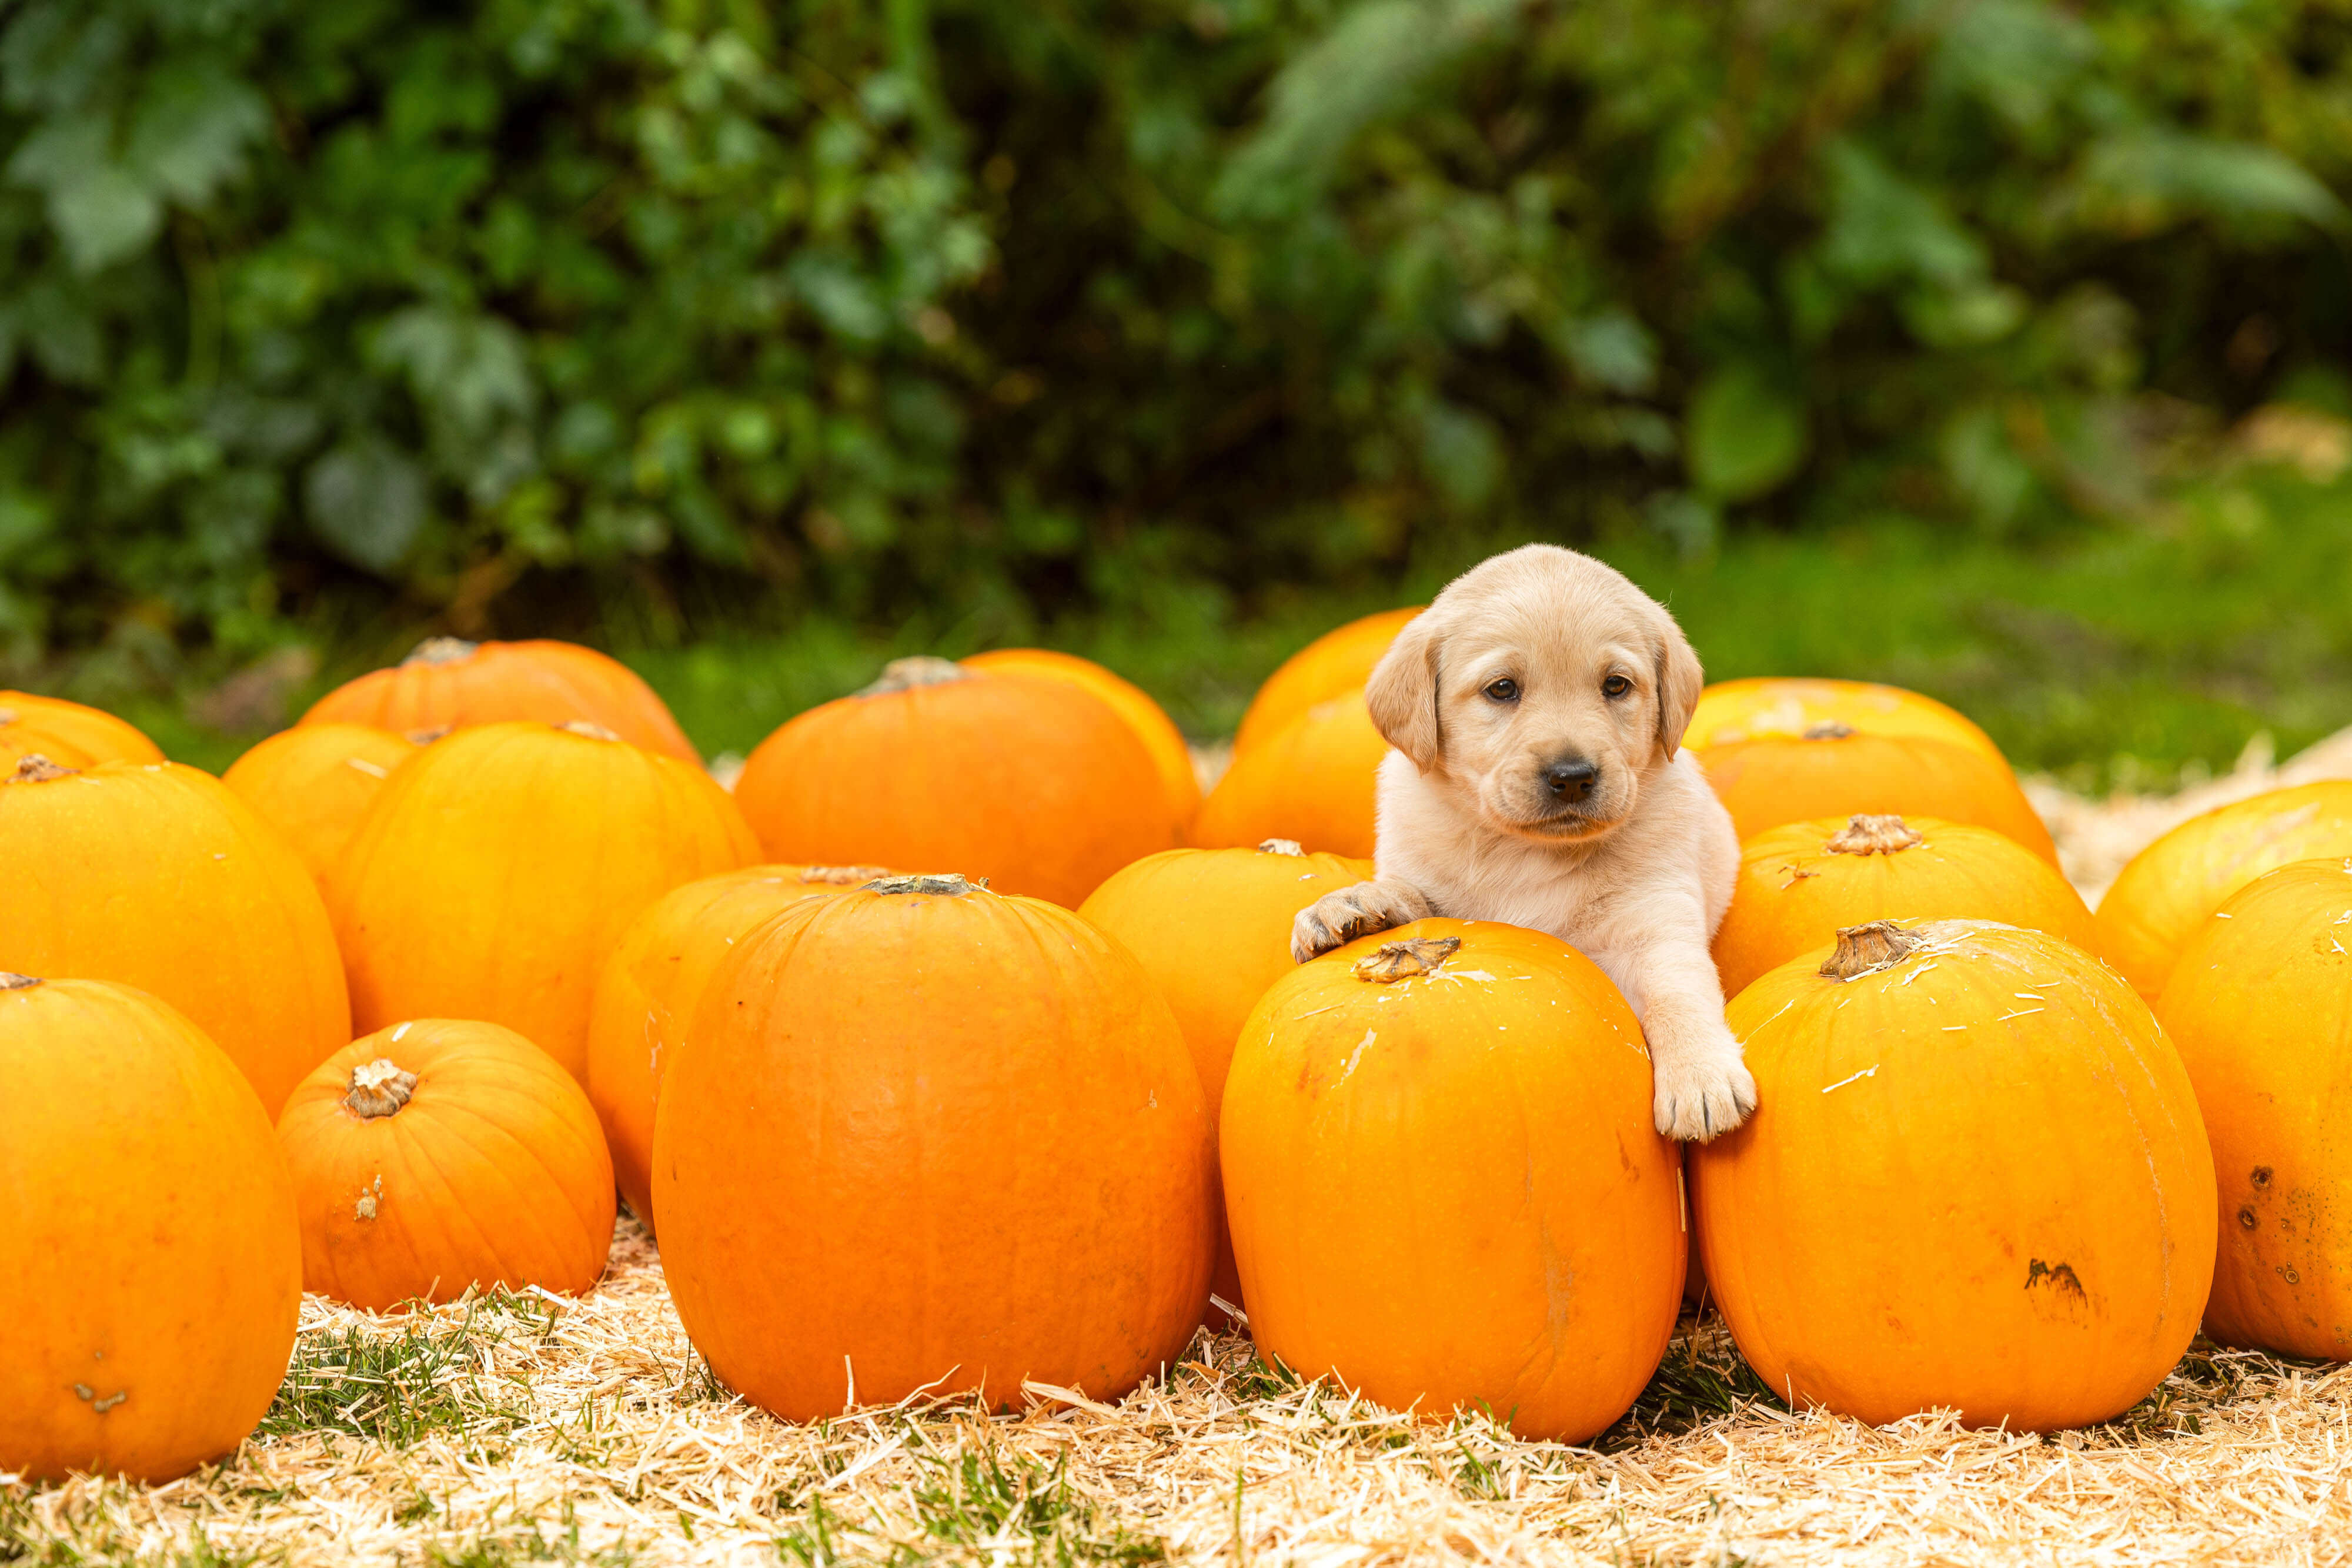 A five-week-old yellow Labrador puppy lays on top of a pumpkin, surrounded by other pumpkins and straw.